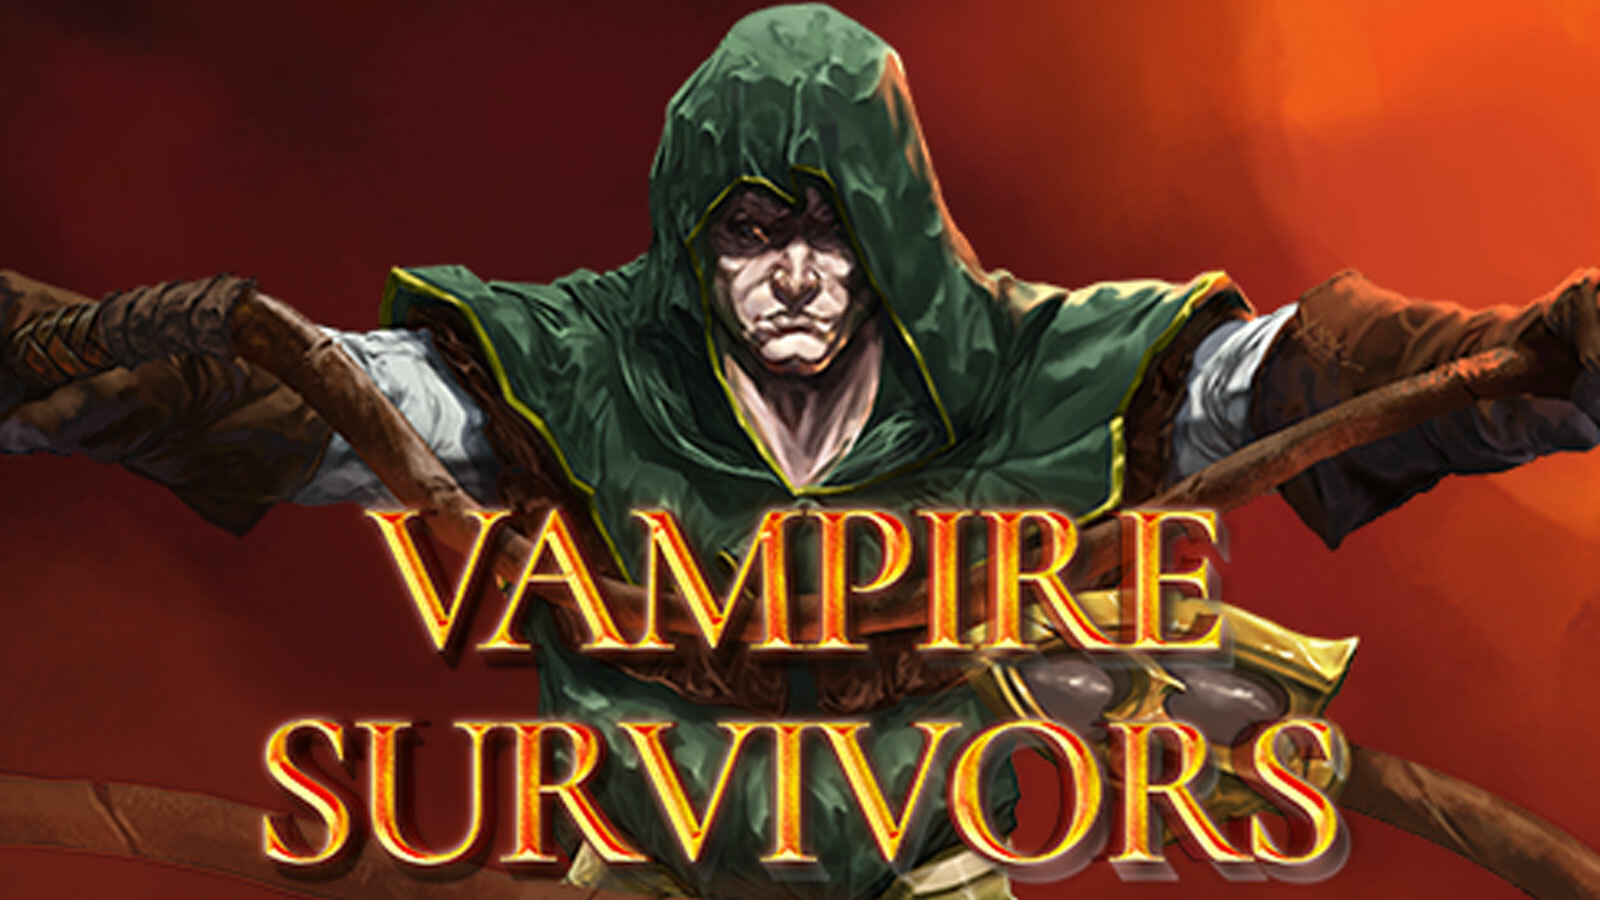 Vampire Survivors To Receive New Engine And Expansions This Year